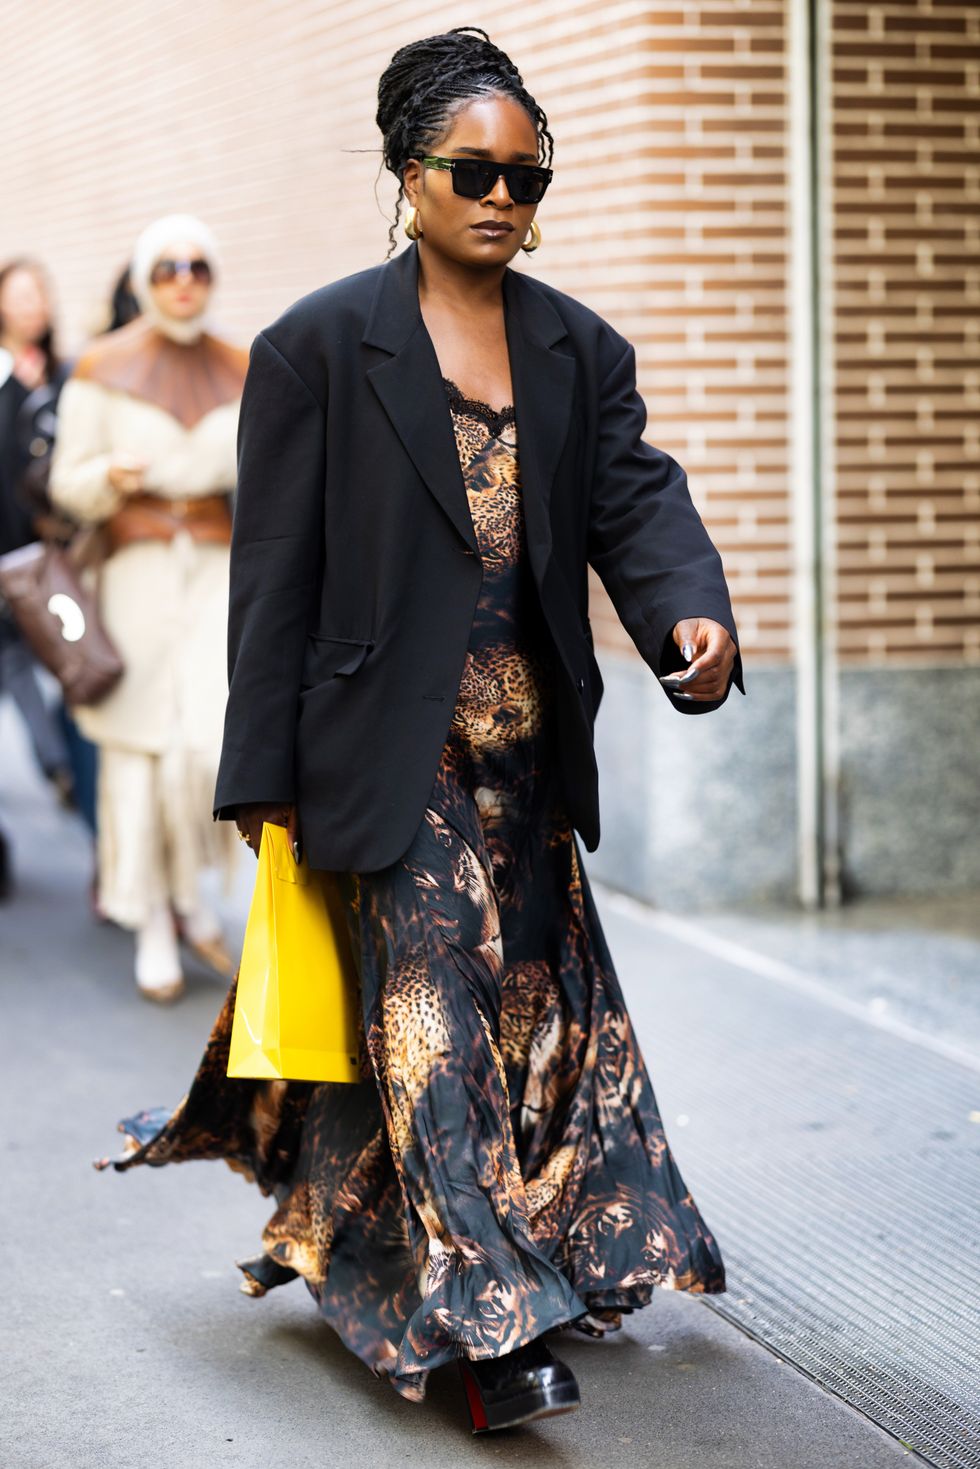 A guest is seen wearing a print tiger dress and black blazer outside the Fendi show during Milan Fashion Week